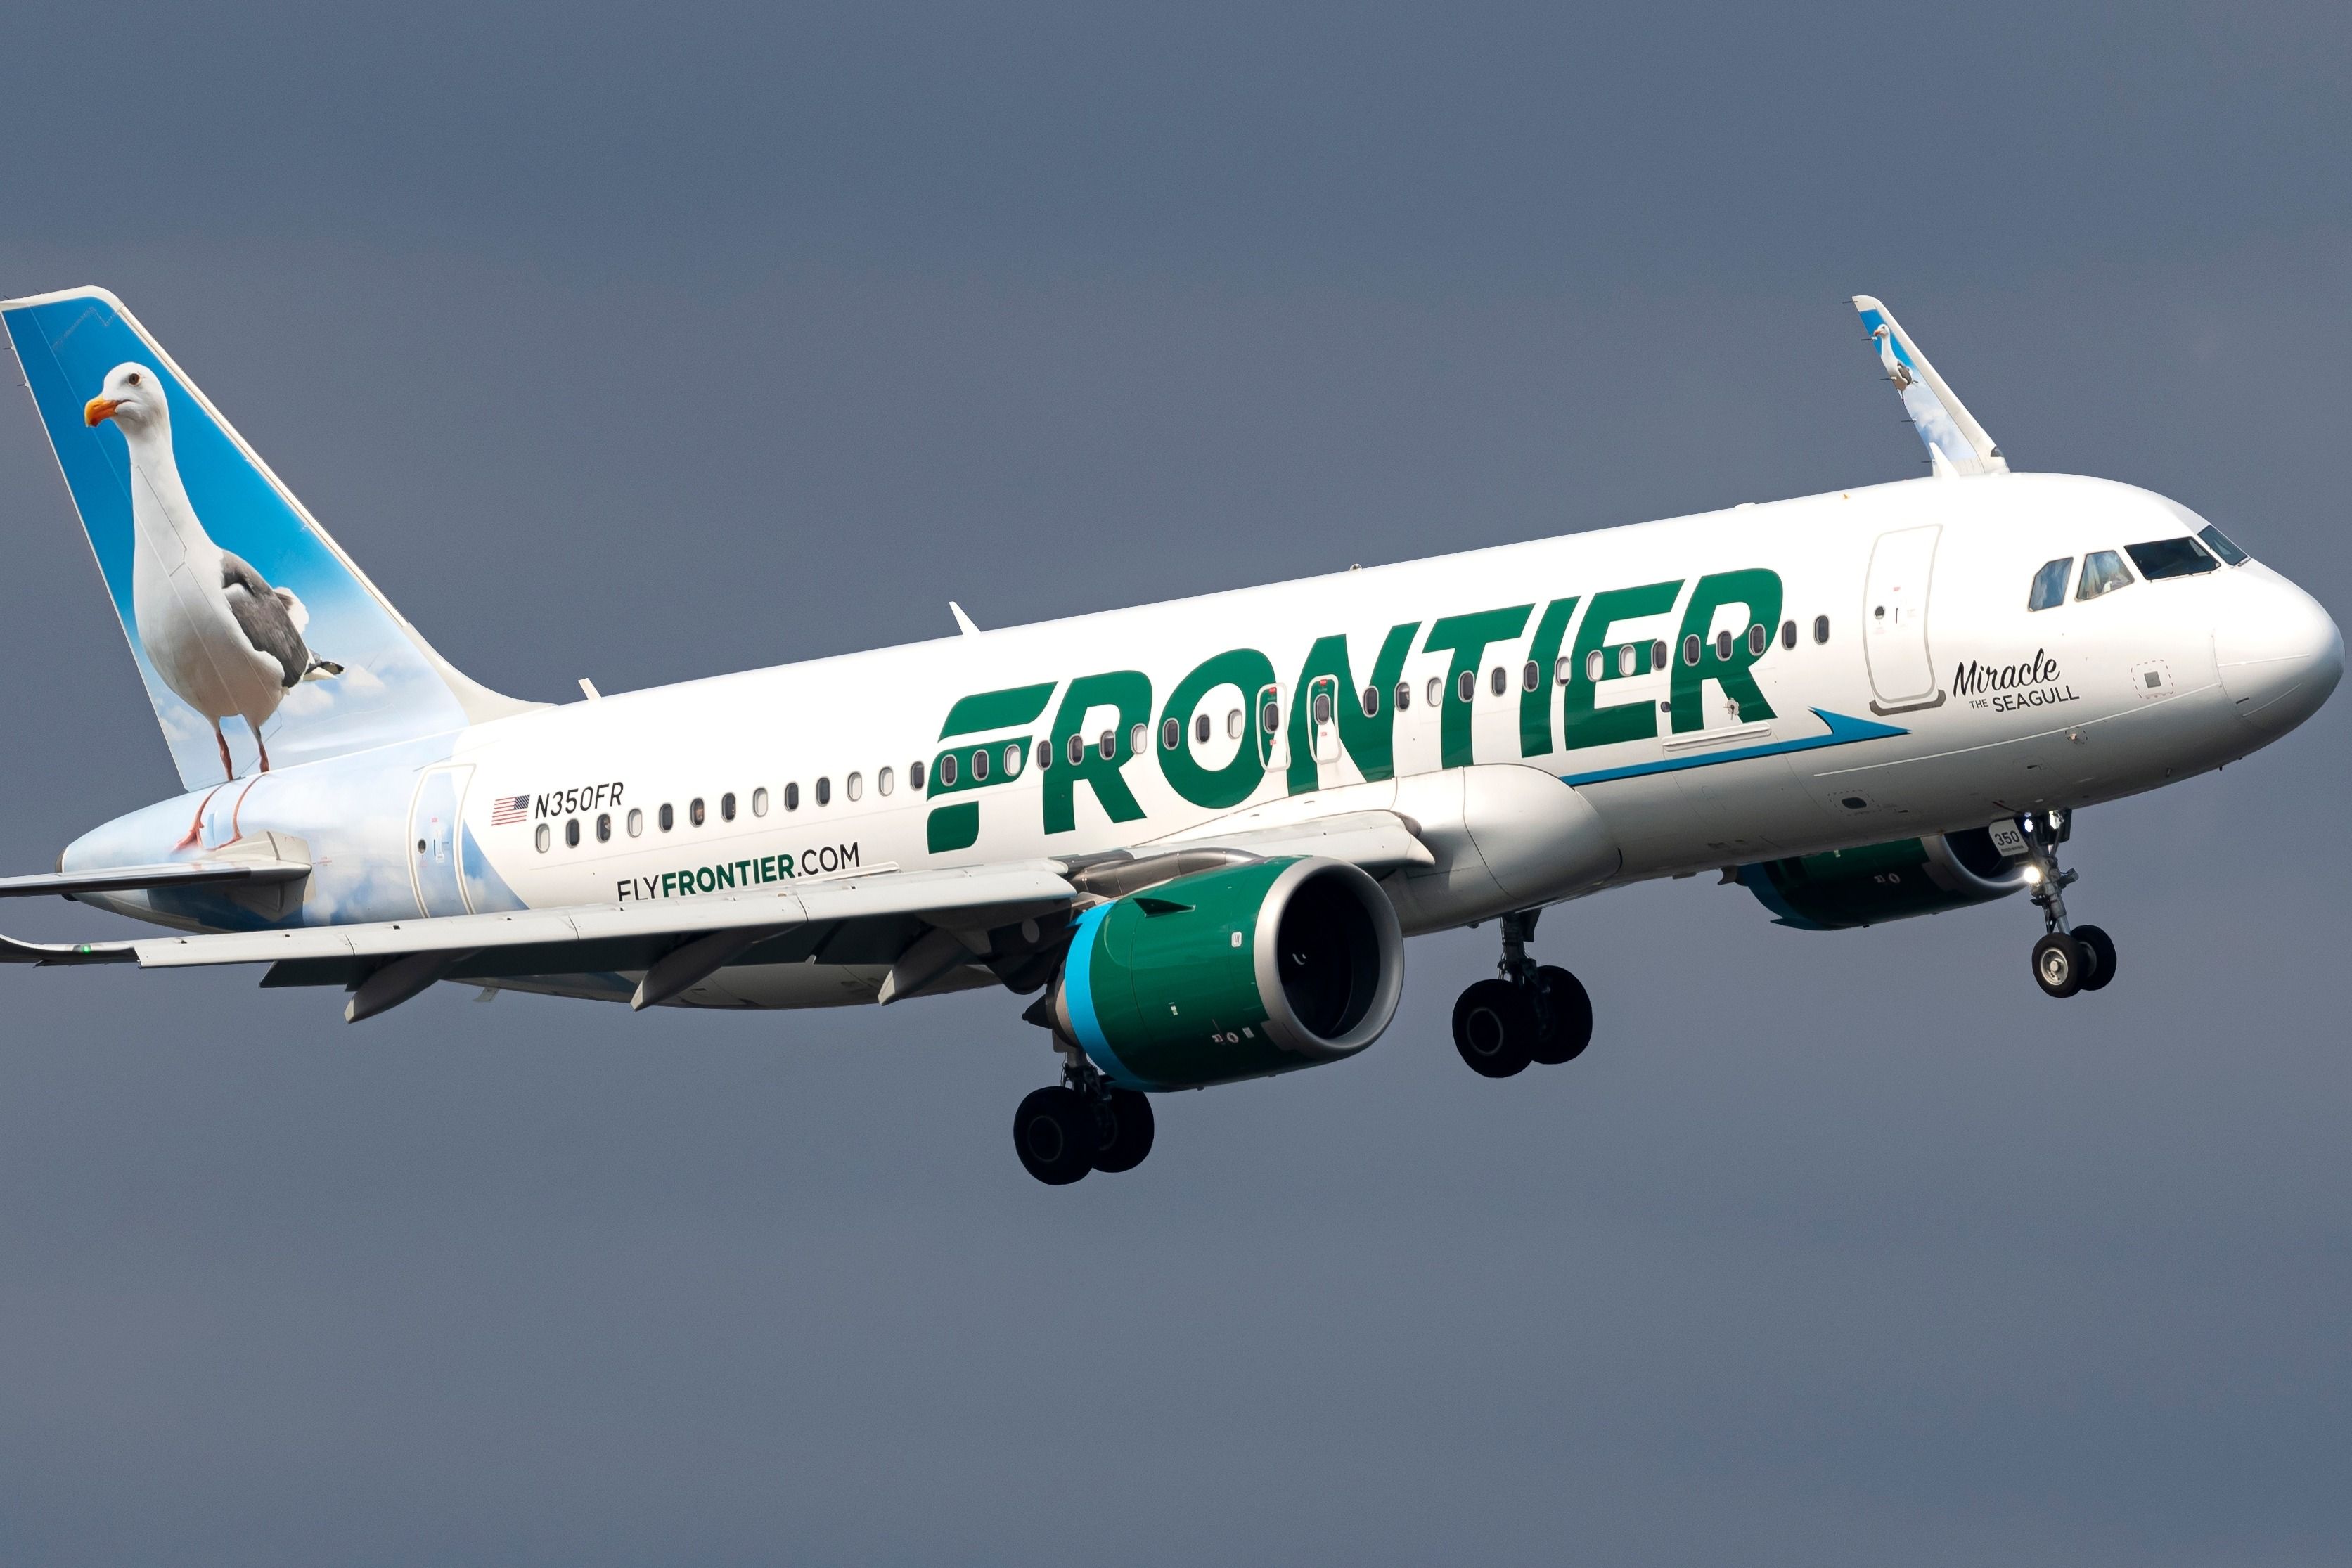 A Frontier Airlines Airbus A320 flying in the sky.